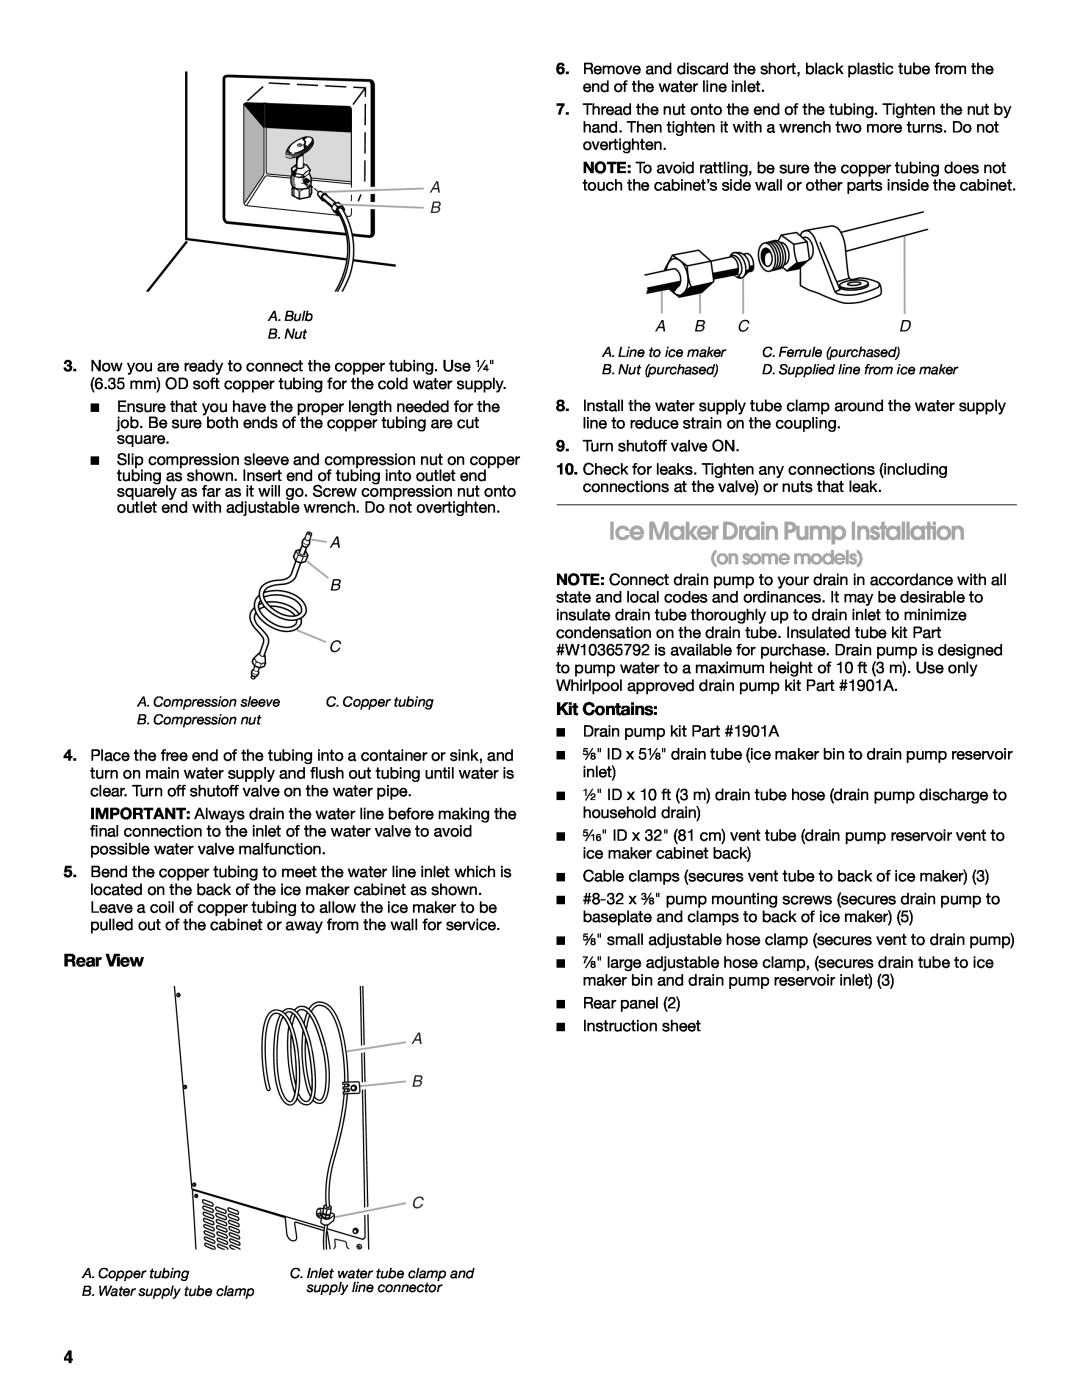 Whirlpool W10541636A Ice Maker Drain Pump Installation, on some models, Rear View, Kit Contains, A B C 